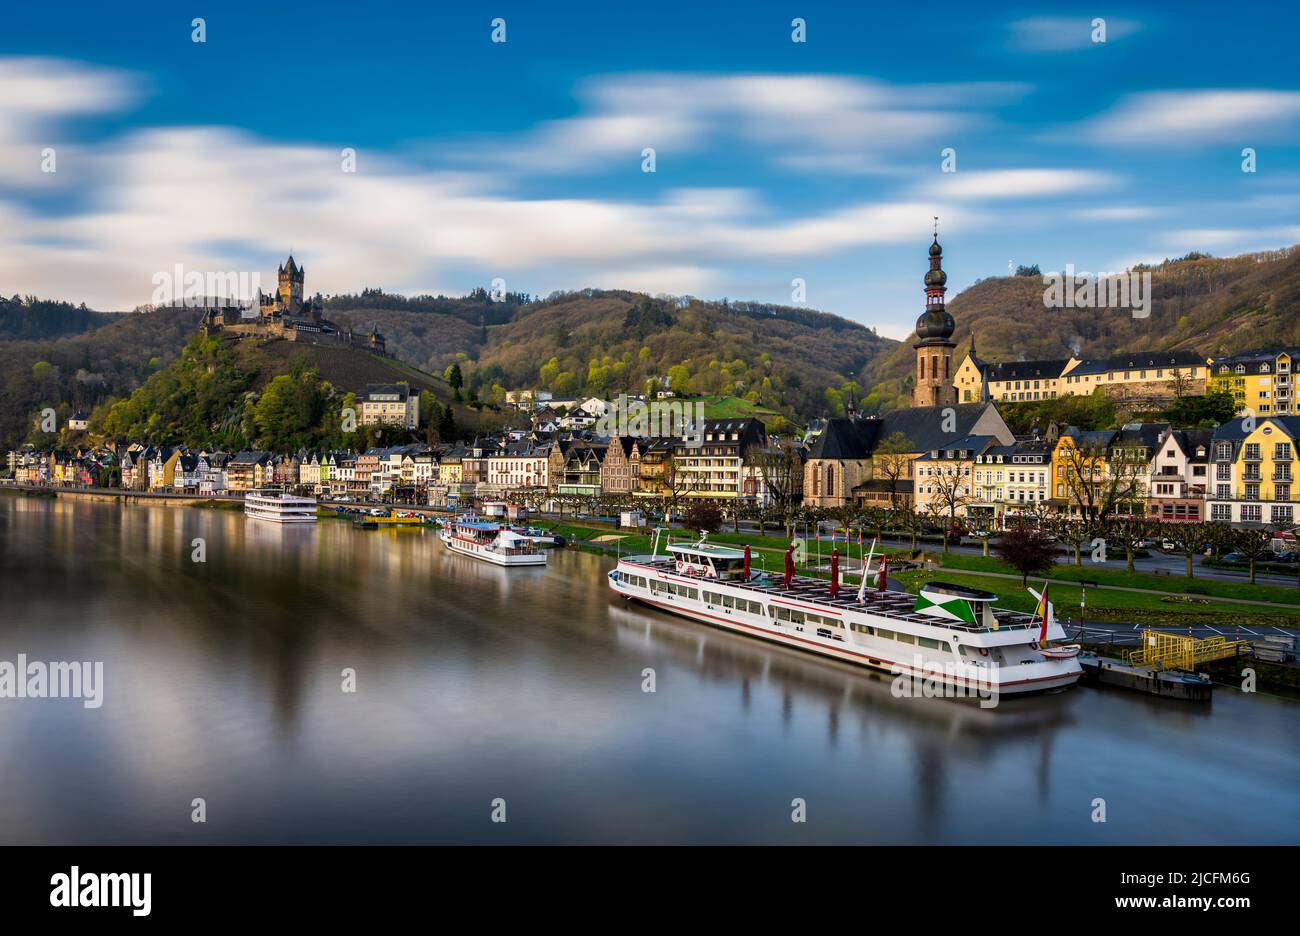 Old town and the Cochem Reichsburg castle on the Moselle river in Germany Stock Photo